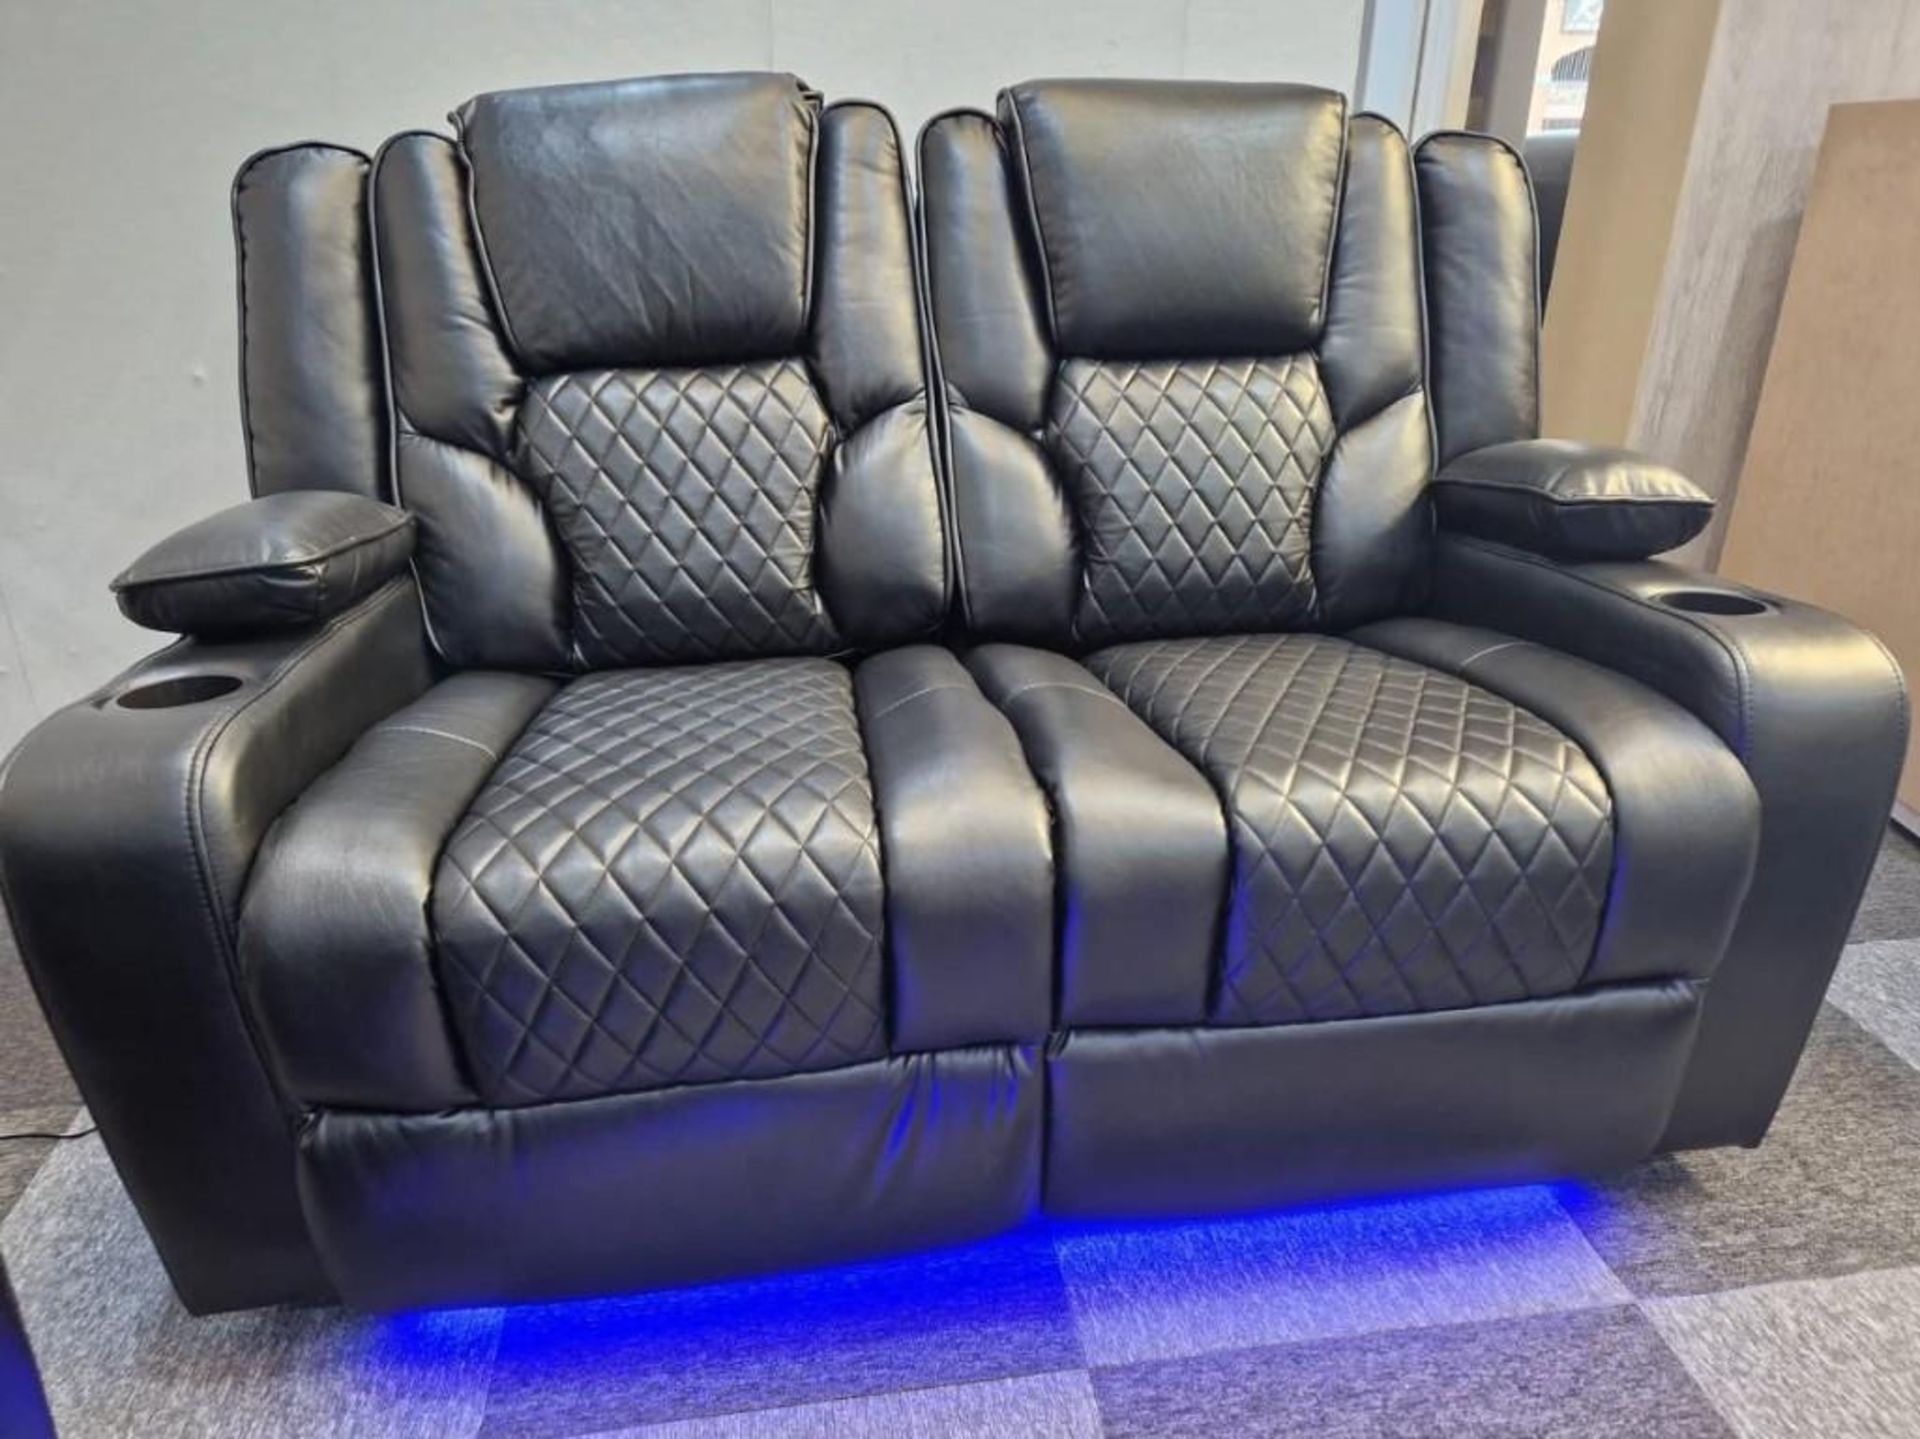 BRAND NEW Black Leather 2 Seater Electric Recliner With USB Charging Port and Floor lights. - Image 2 of 4